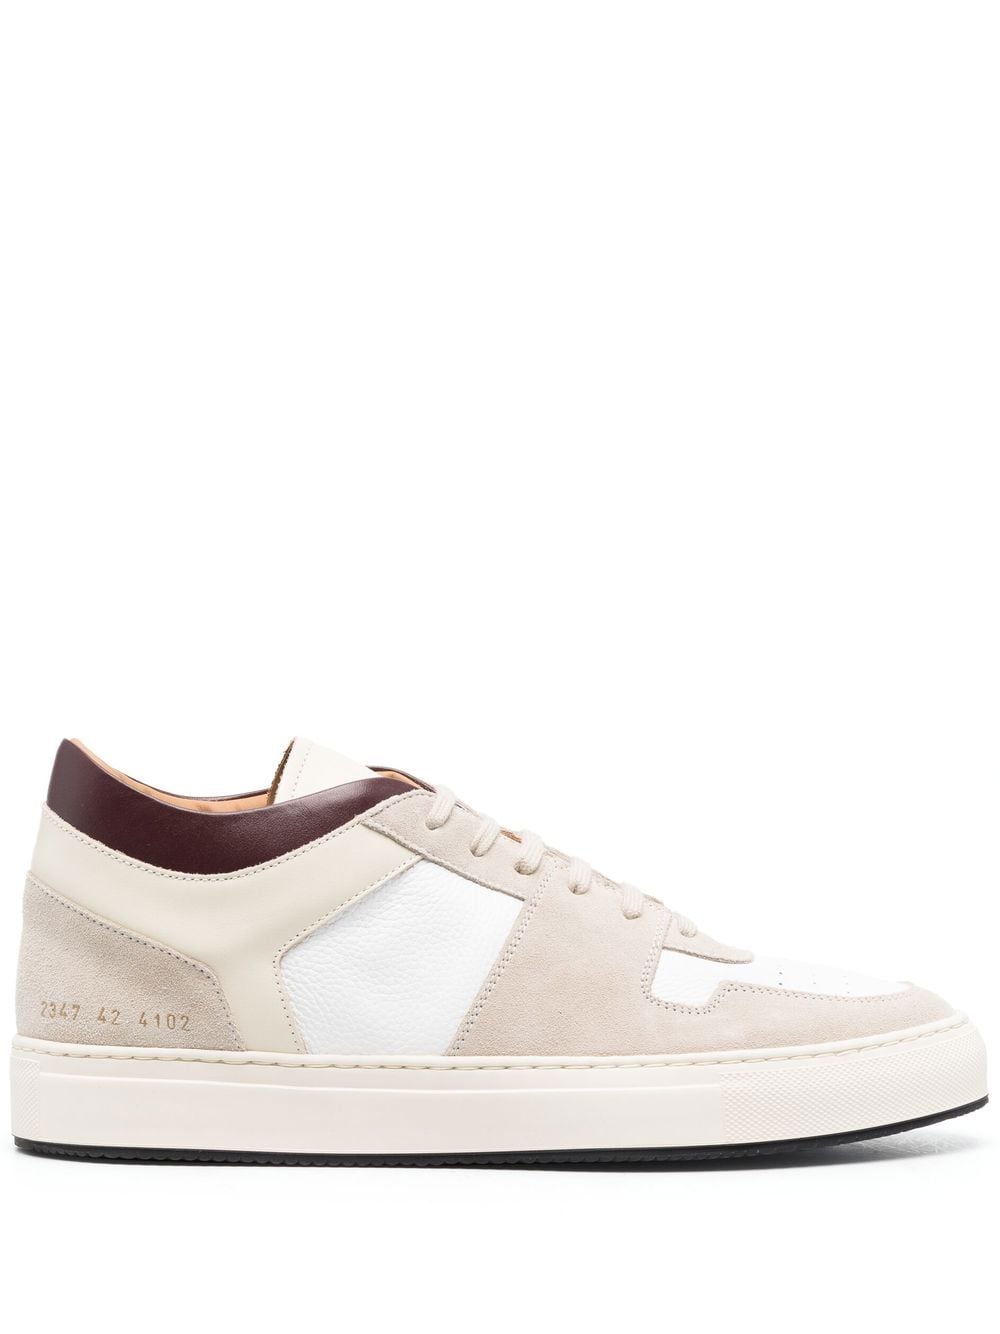 Common Projects Decades Sneakers - Nude von Common Projects